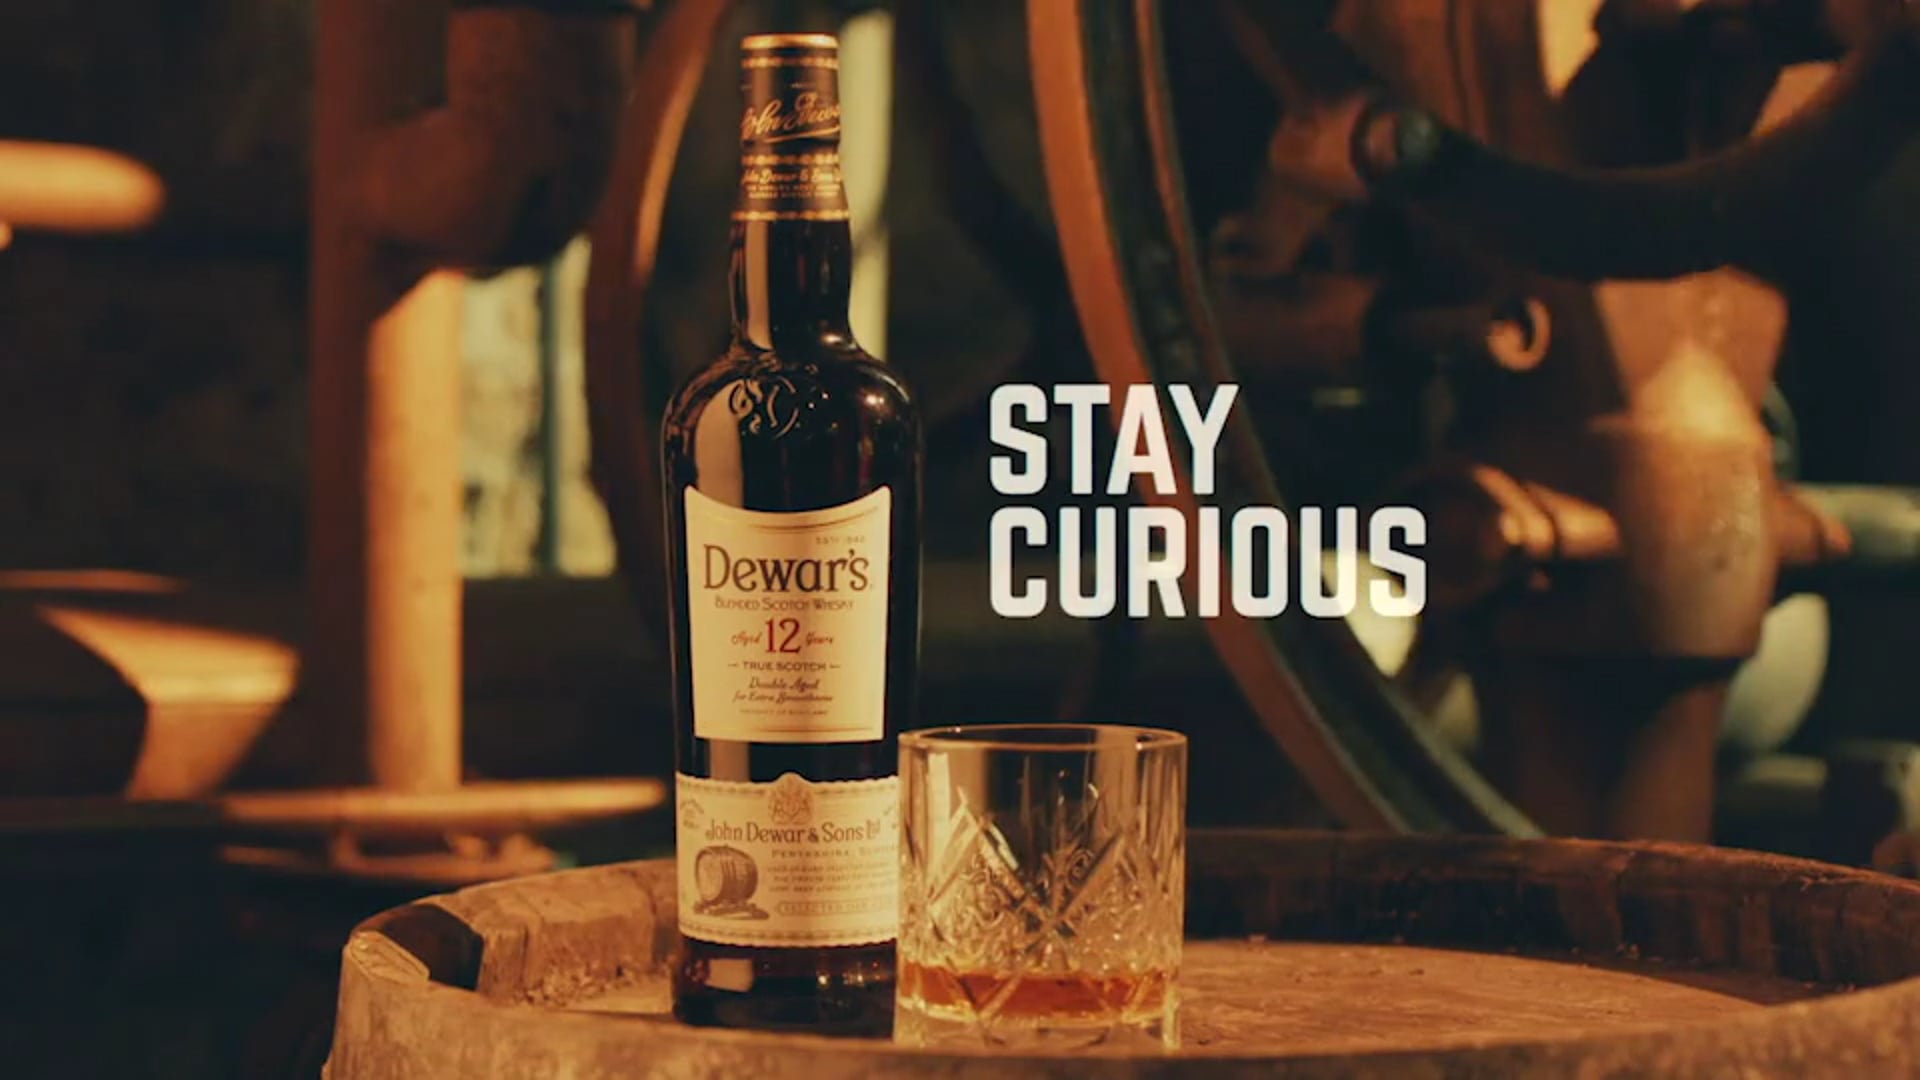 DEWARS- STAY CURIOUS "Pipes"